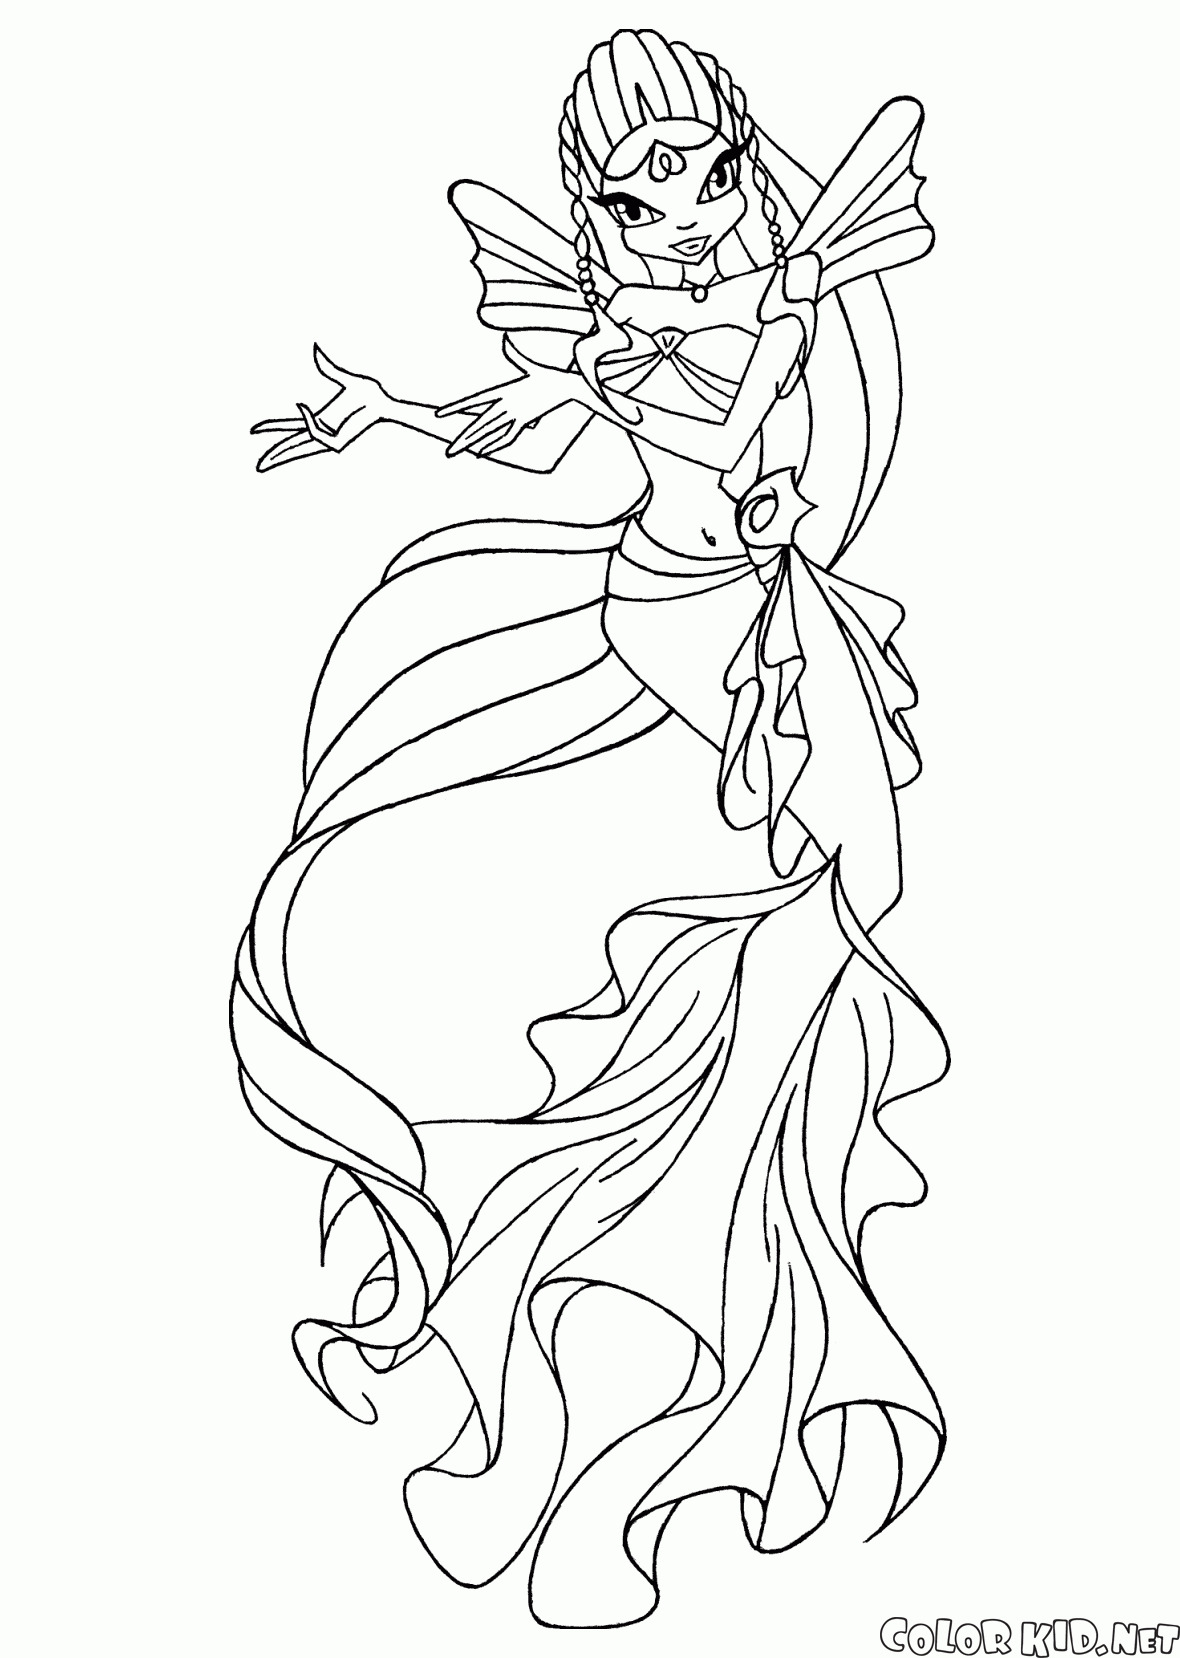 a new coat for anna coloring pages - photo #27